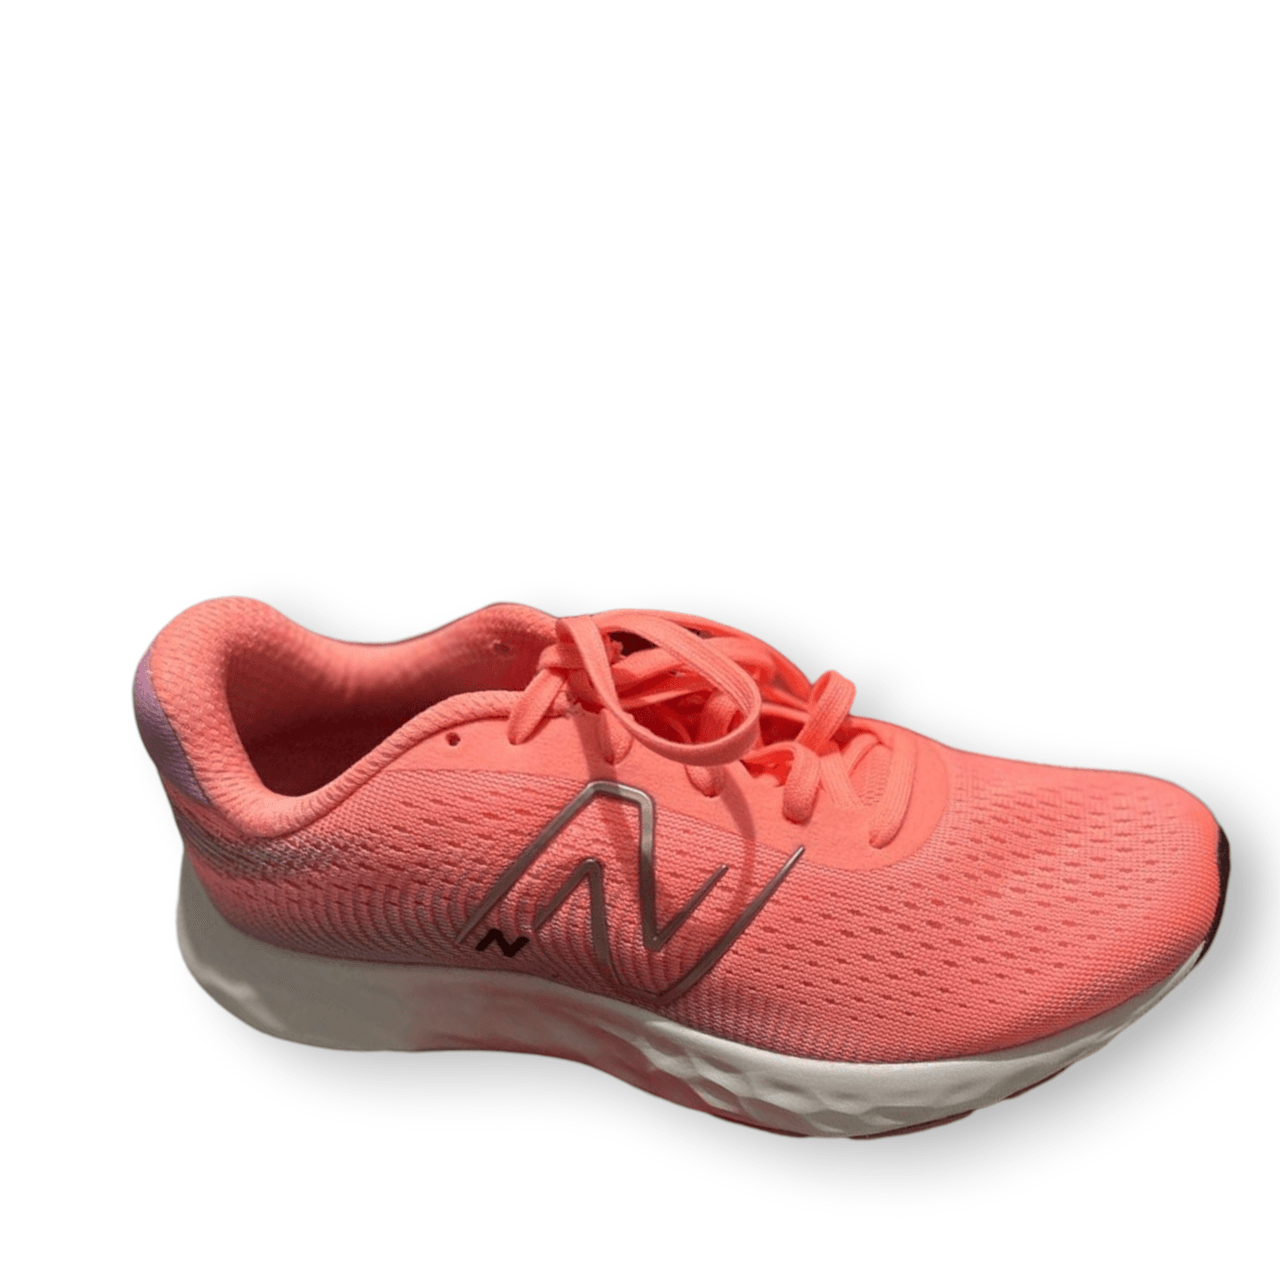 New Balance Pink Sneakers